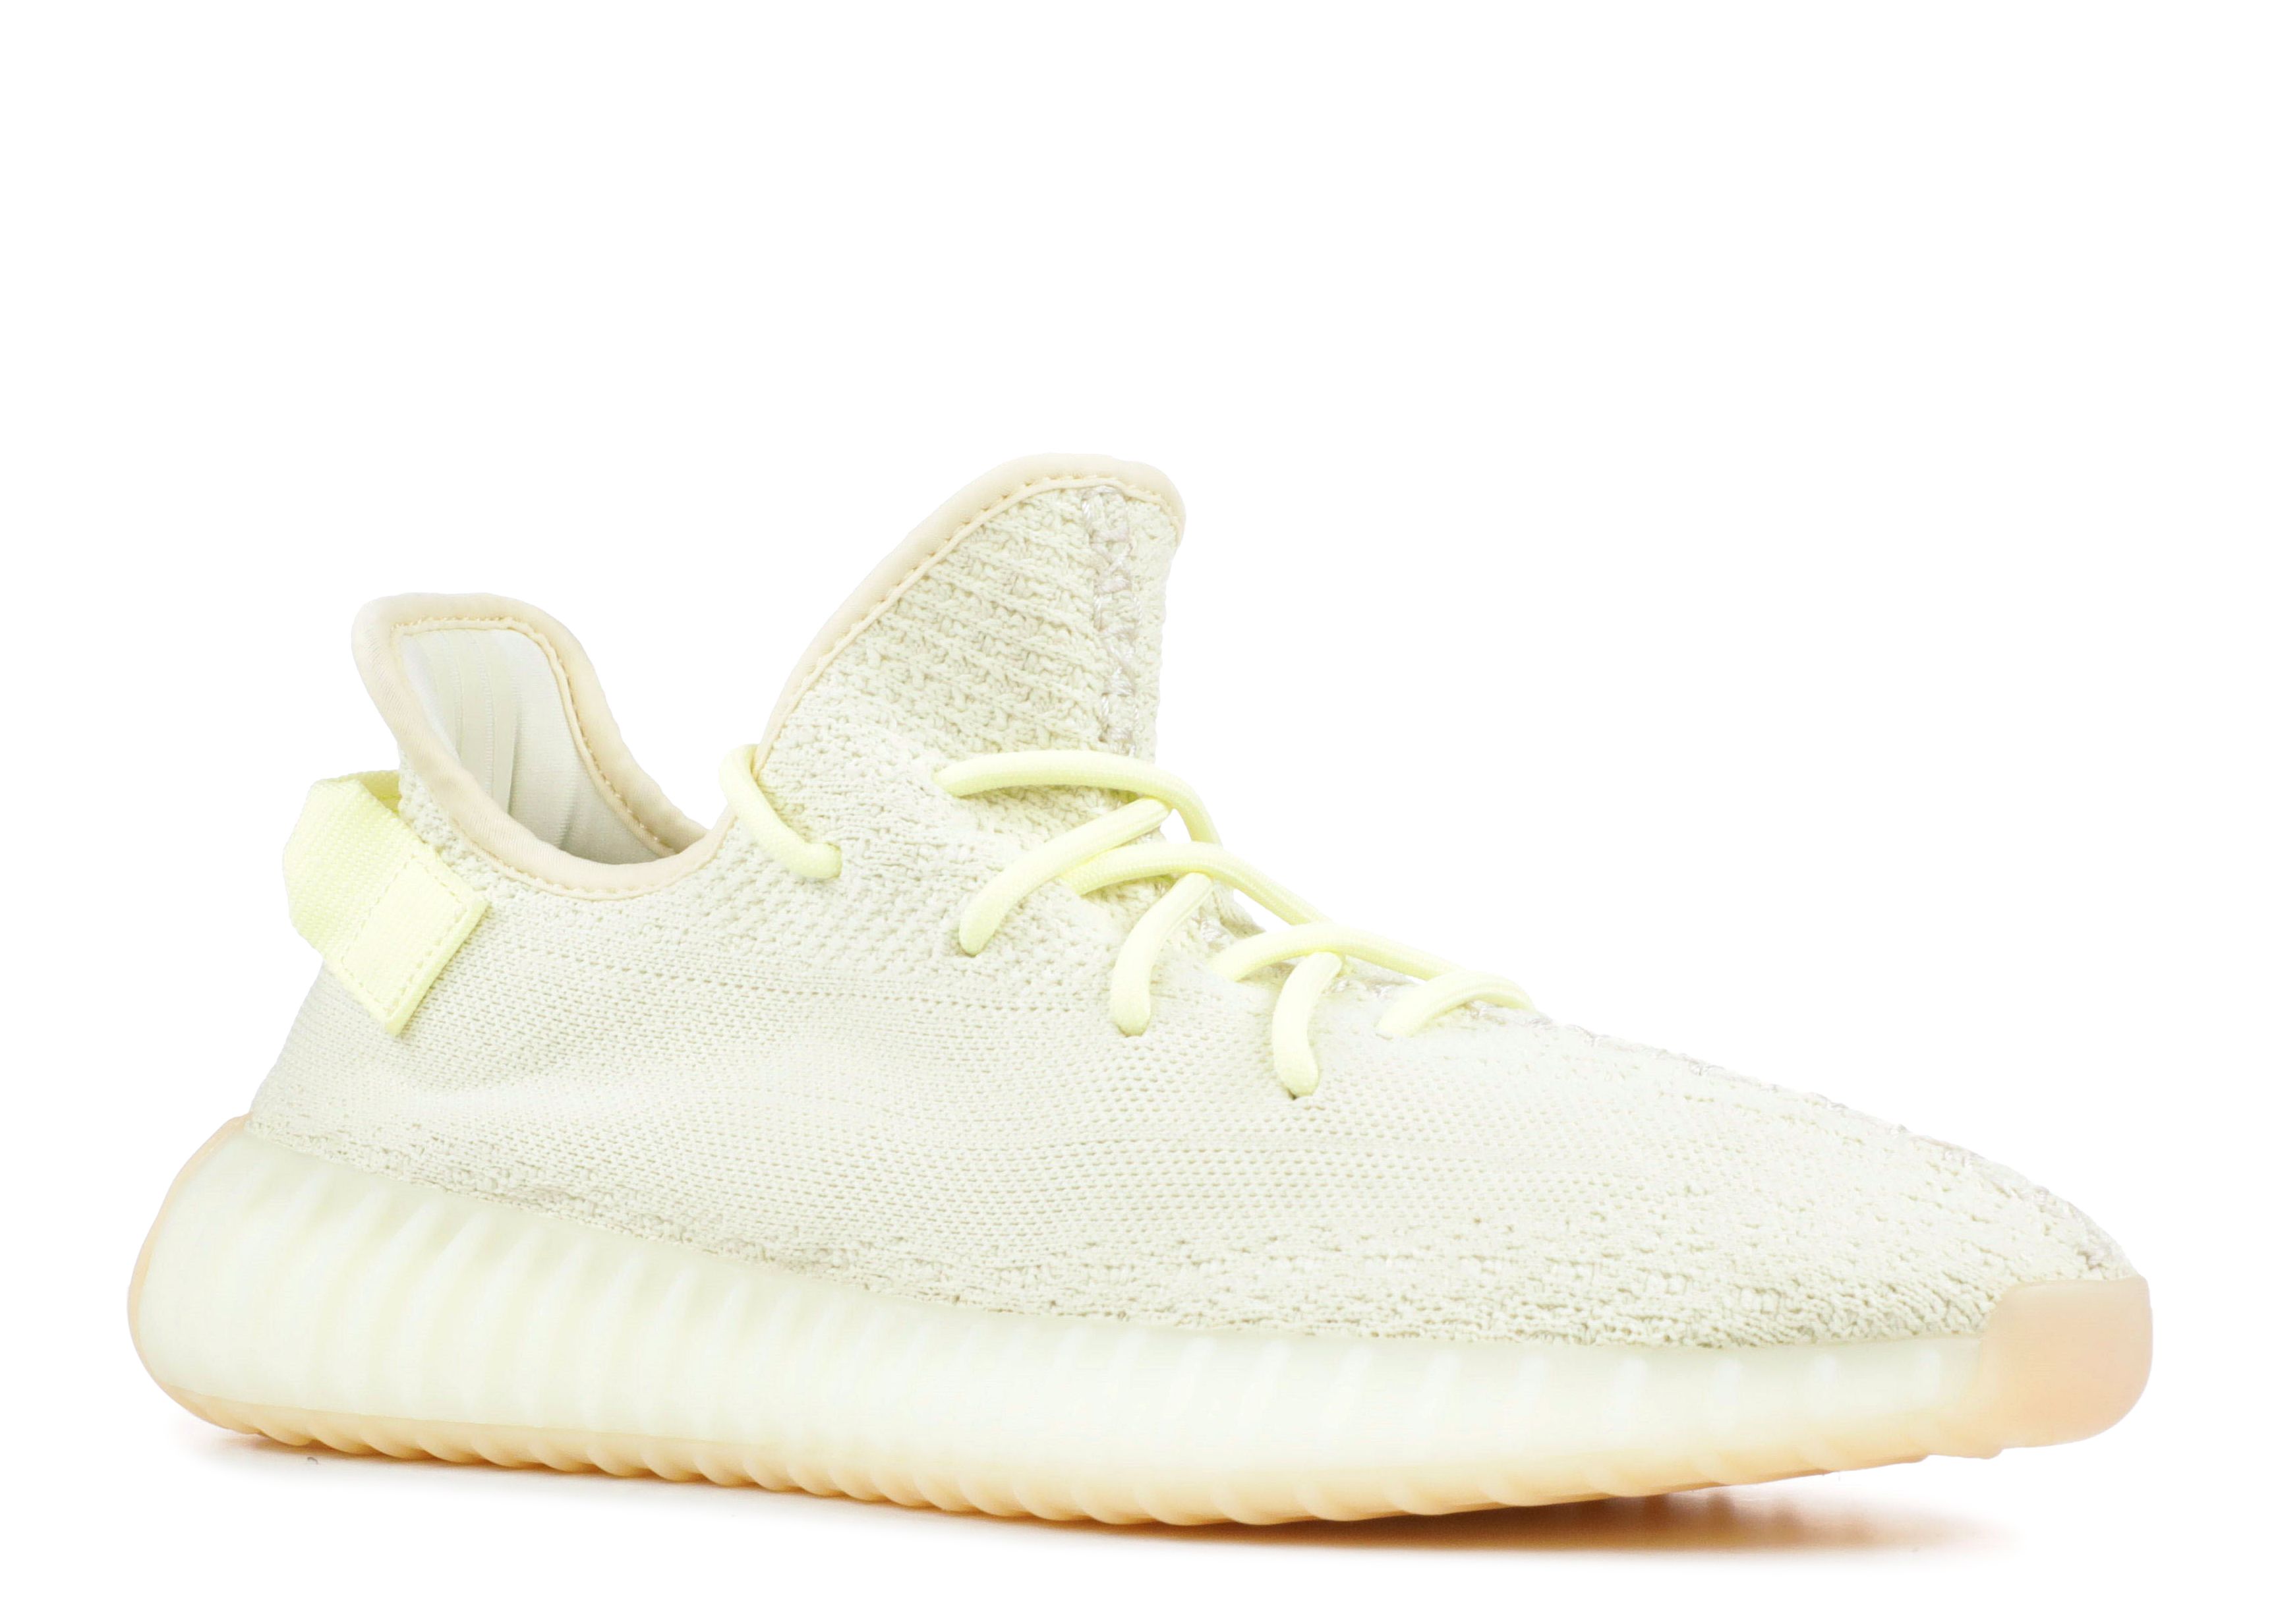 adidas yeezy boost 350 v2 butter mens stores